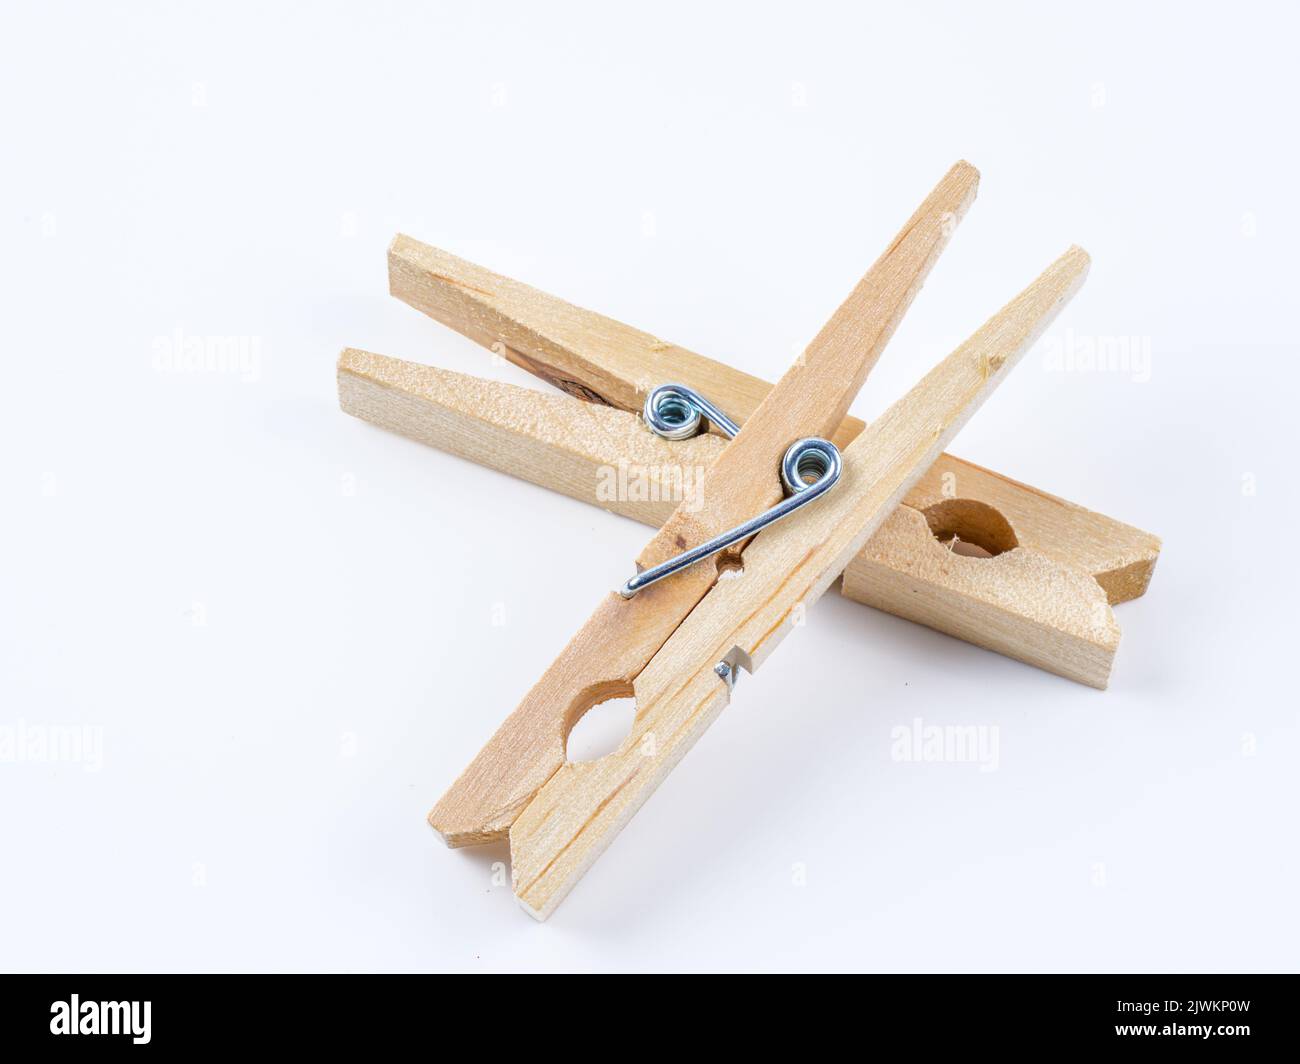 Stainless steel spring type wooden clothes pegs isolated on a white background Stock Photo